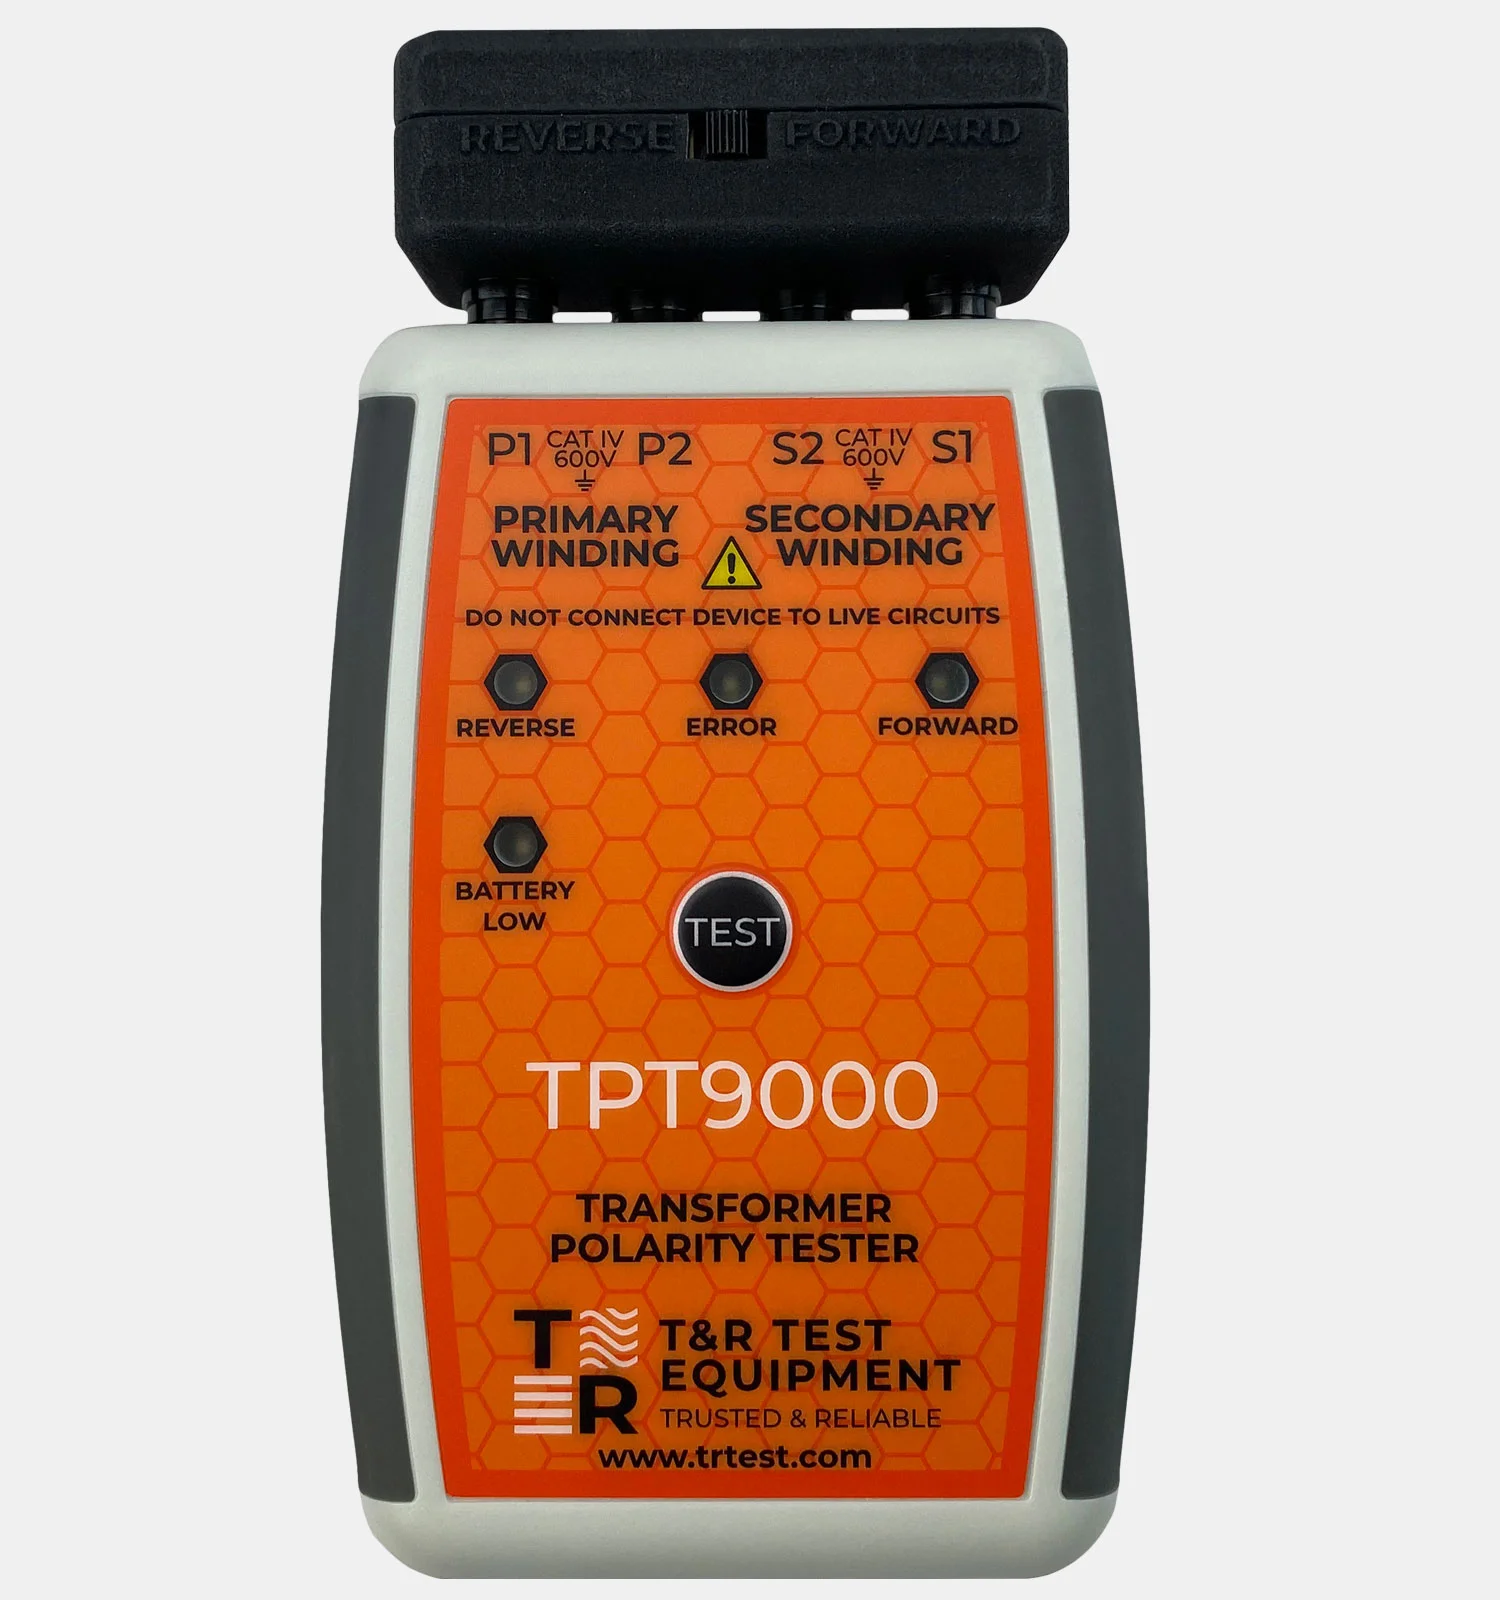 UK Suppliers of TPT9000 Transformer Polarity Tester